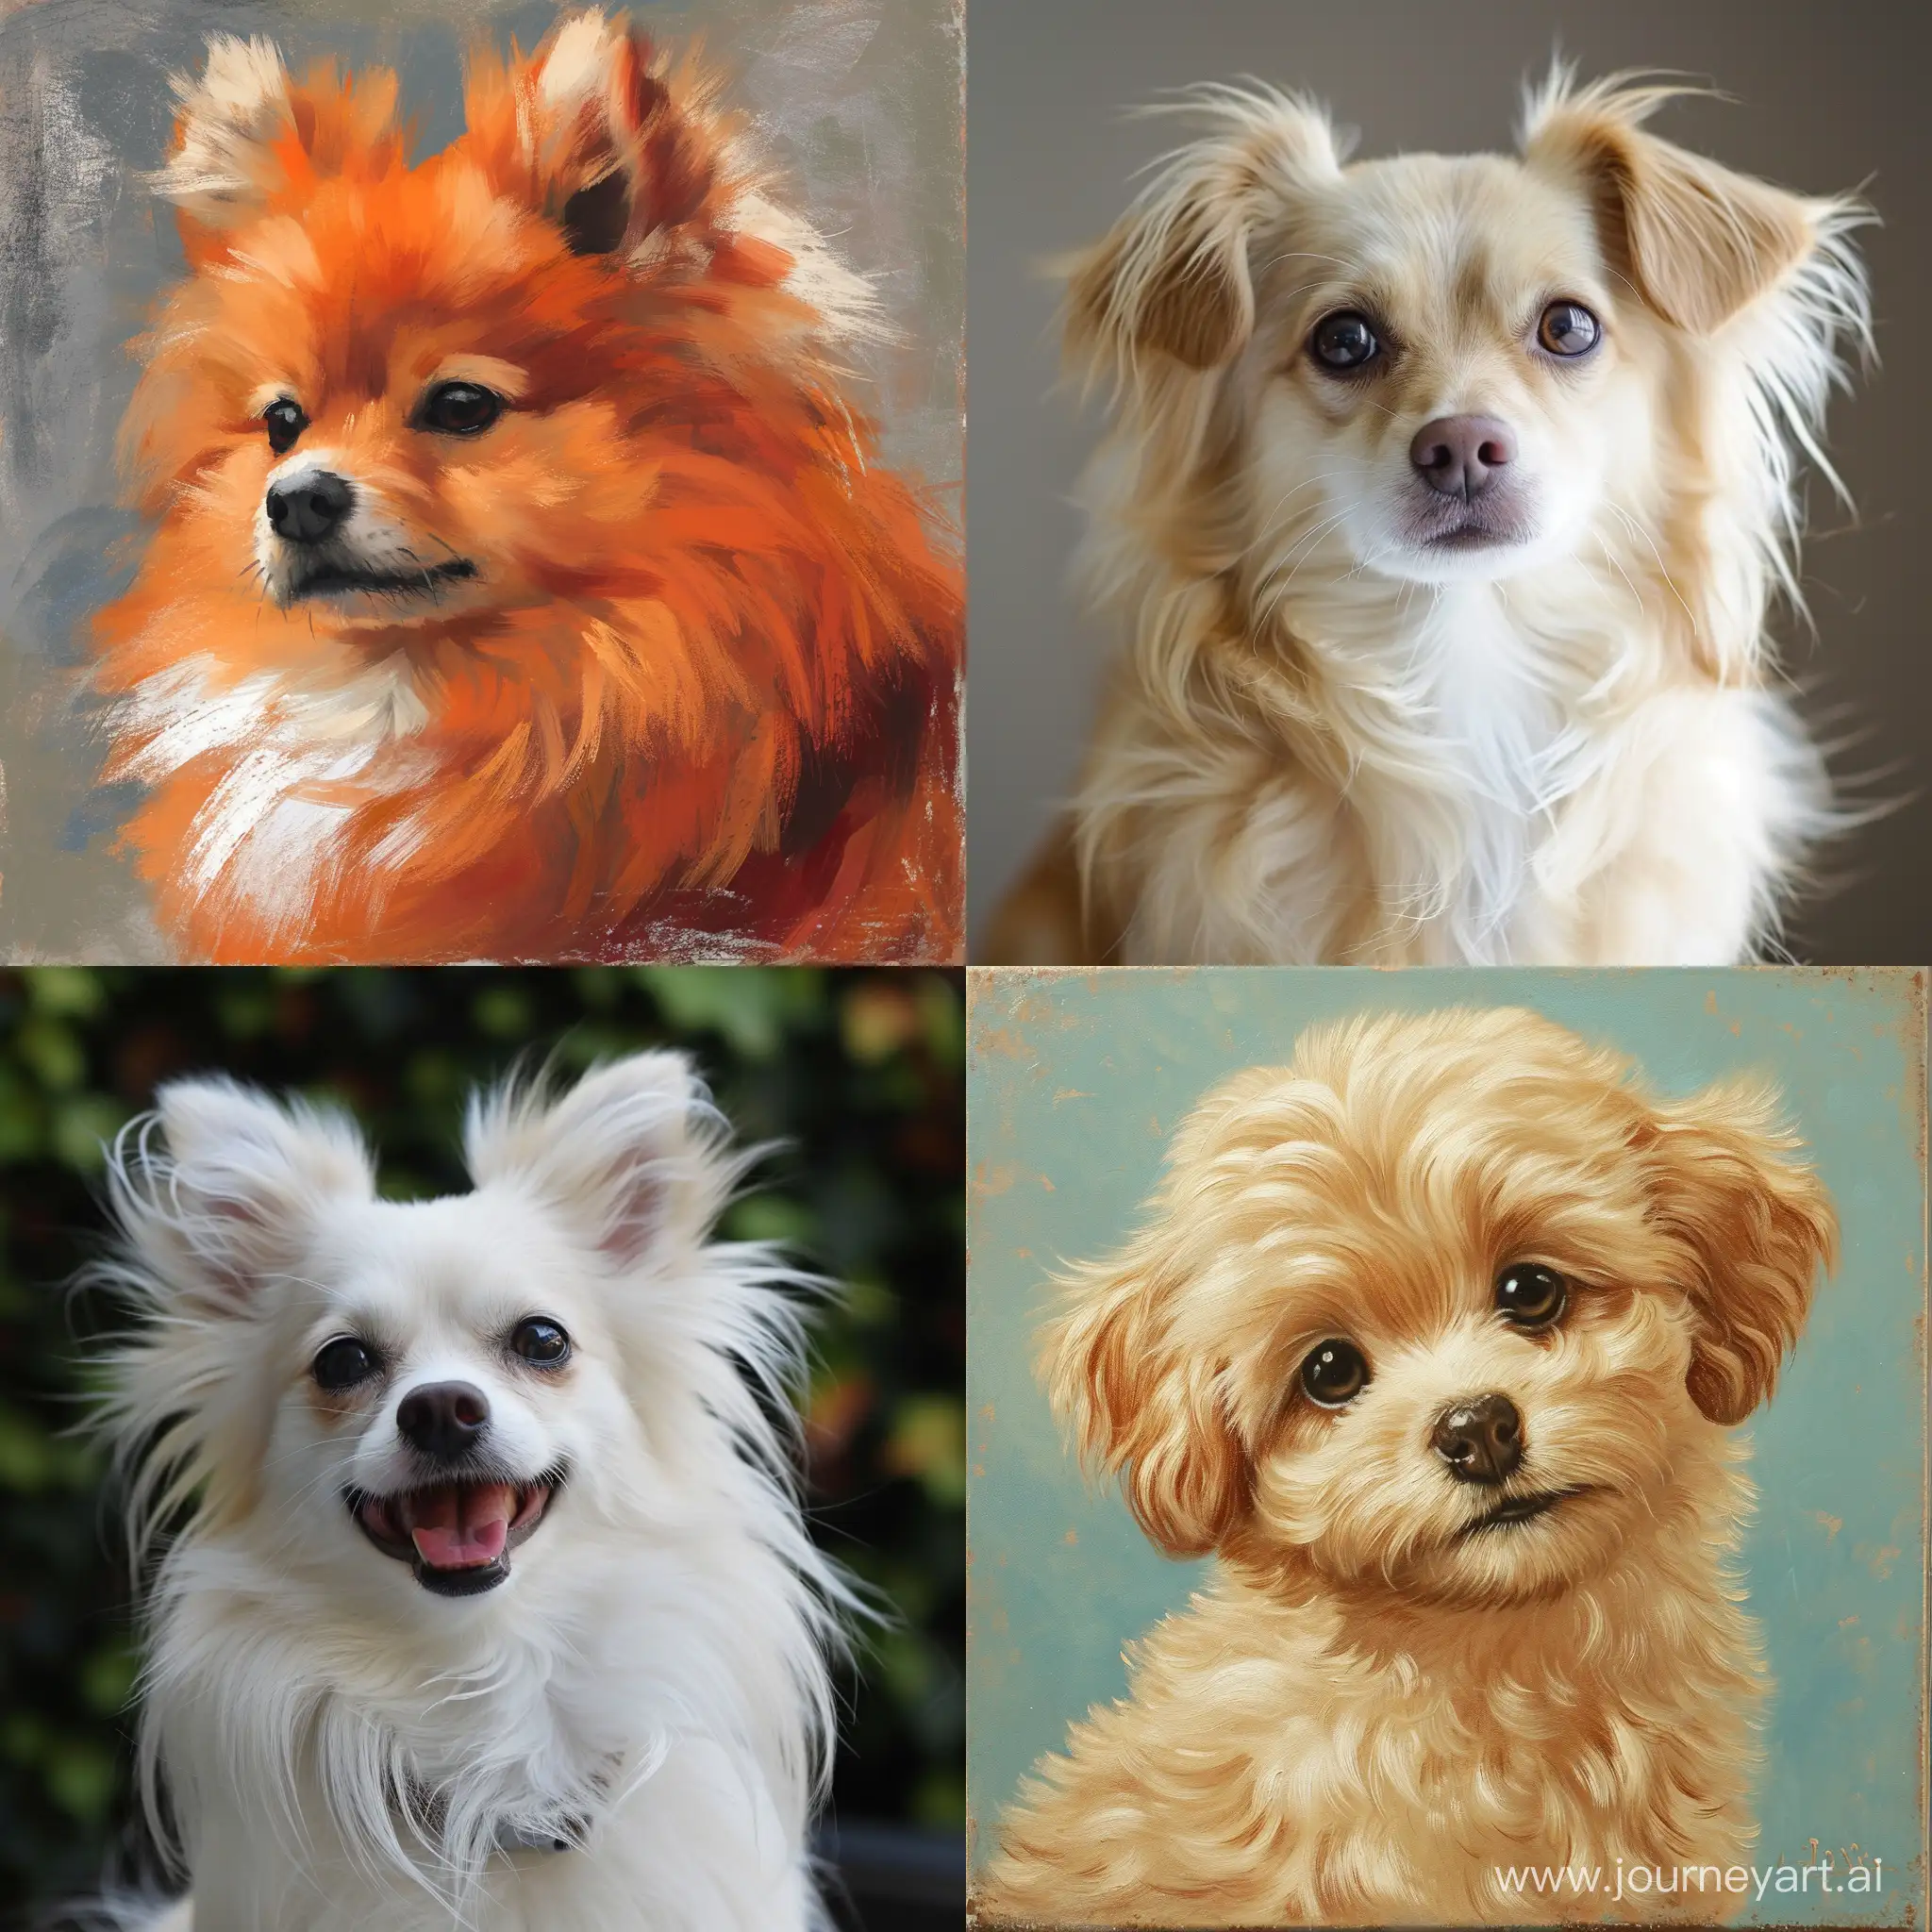 Adorable-Fluffy-Dog-with-Version-6-Rendering-in-a-Square-Aspect-Ratio-Image-56204